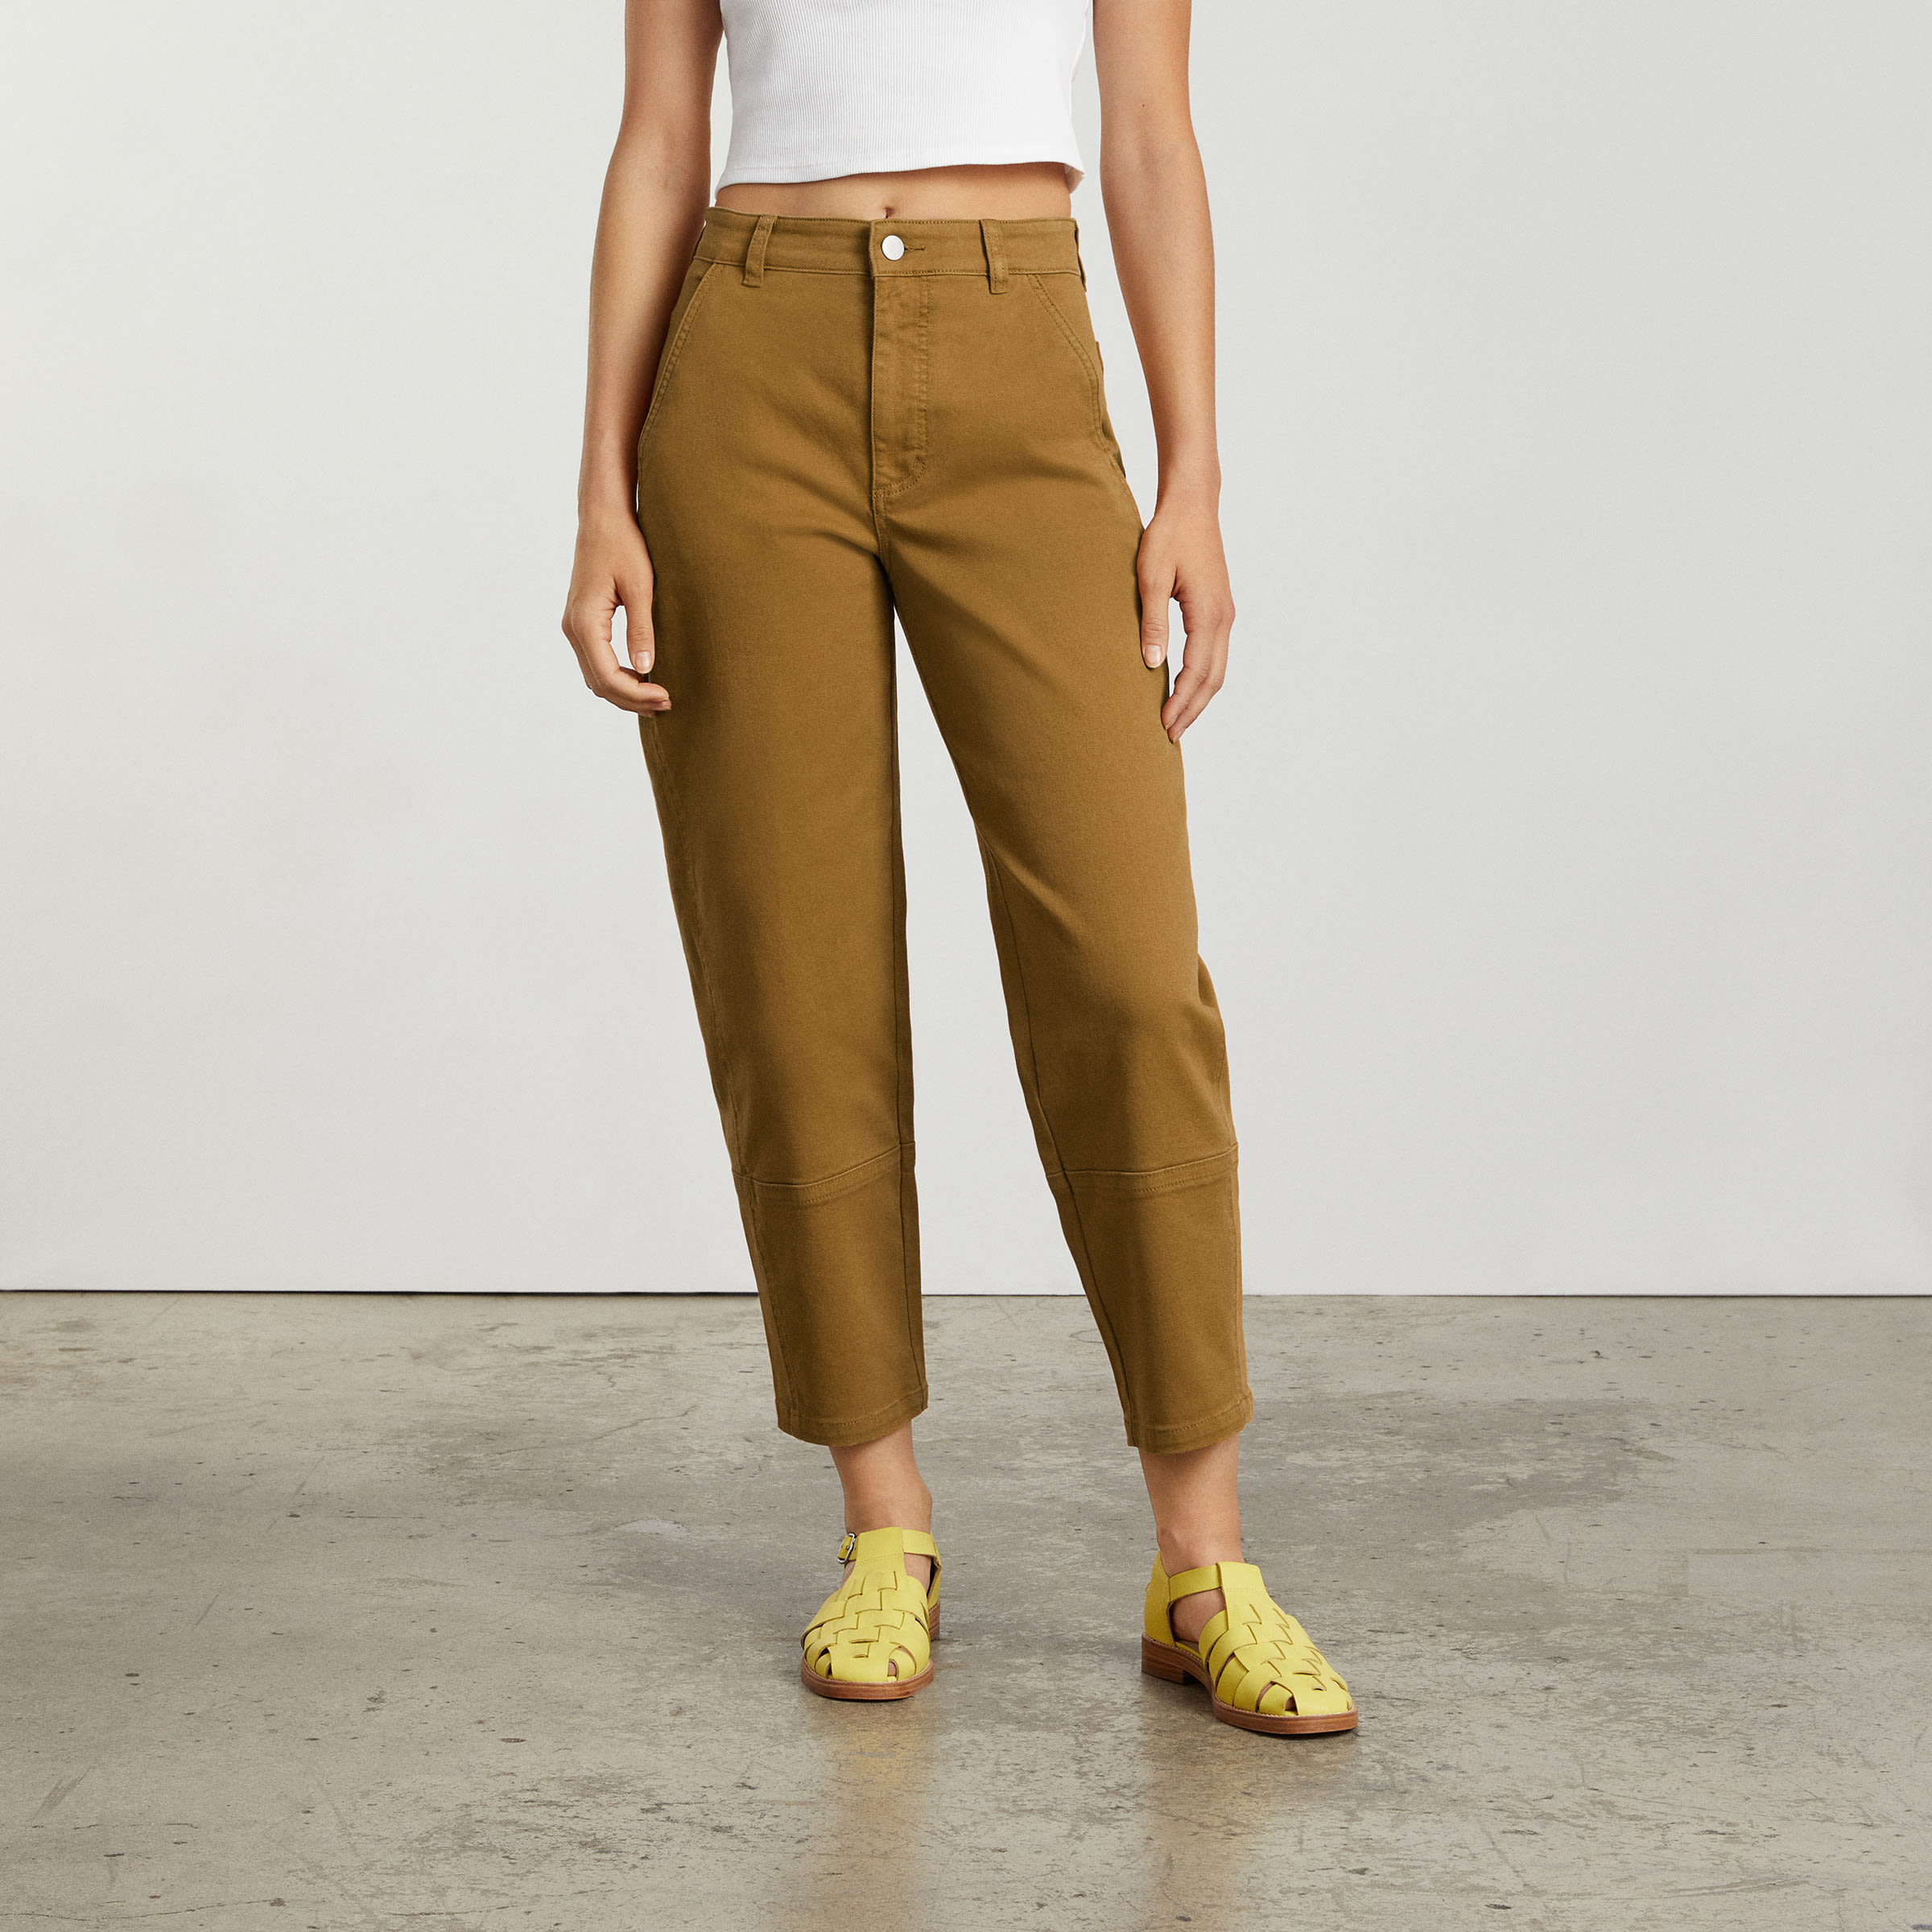 Everlane Utility Barrel Pant Review: I Own These $98 Pants in 2 Colors